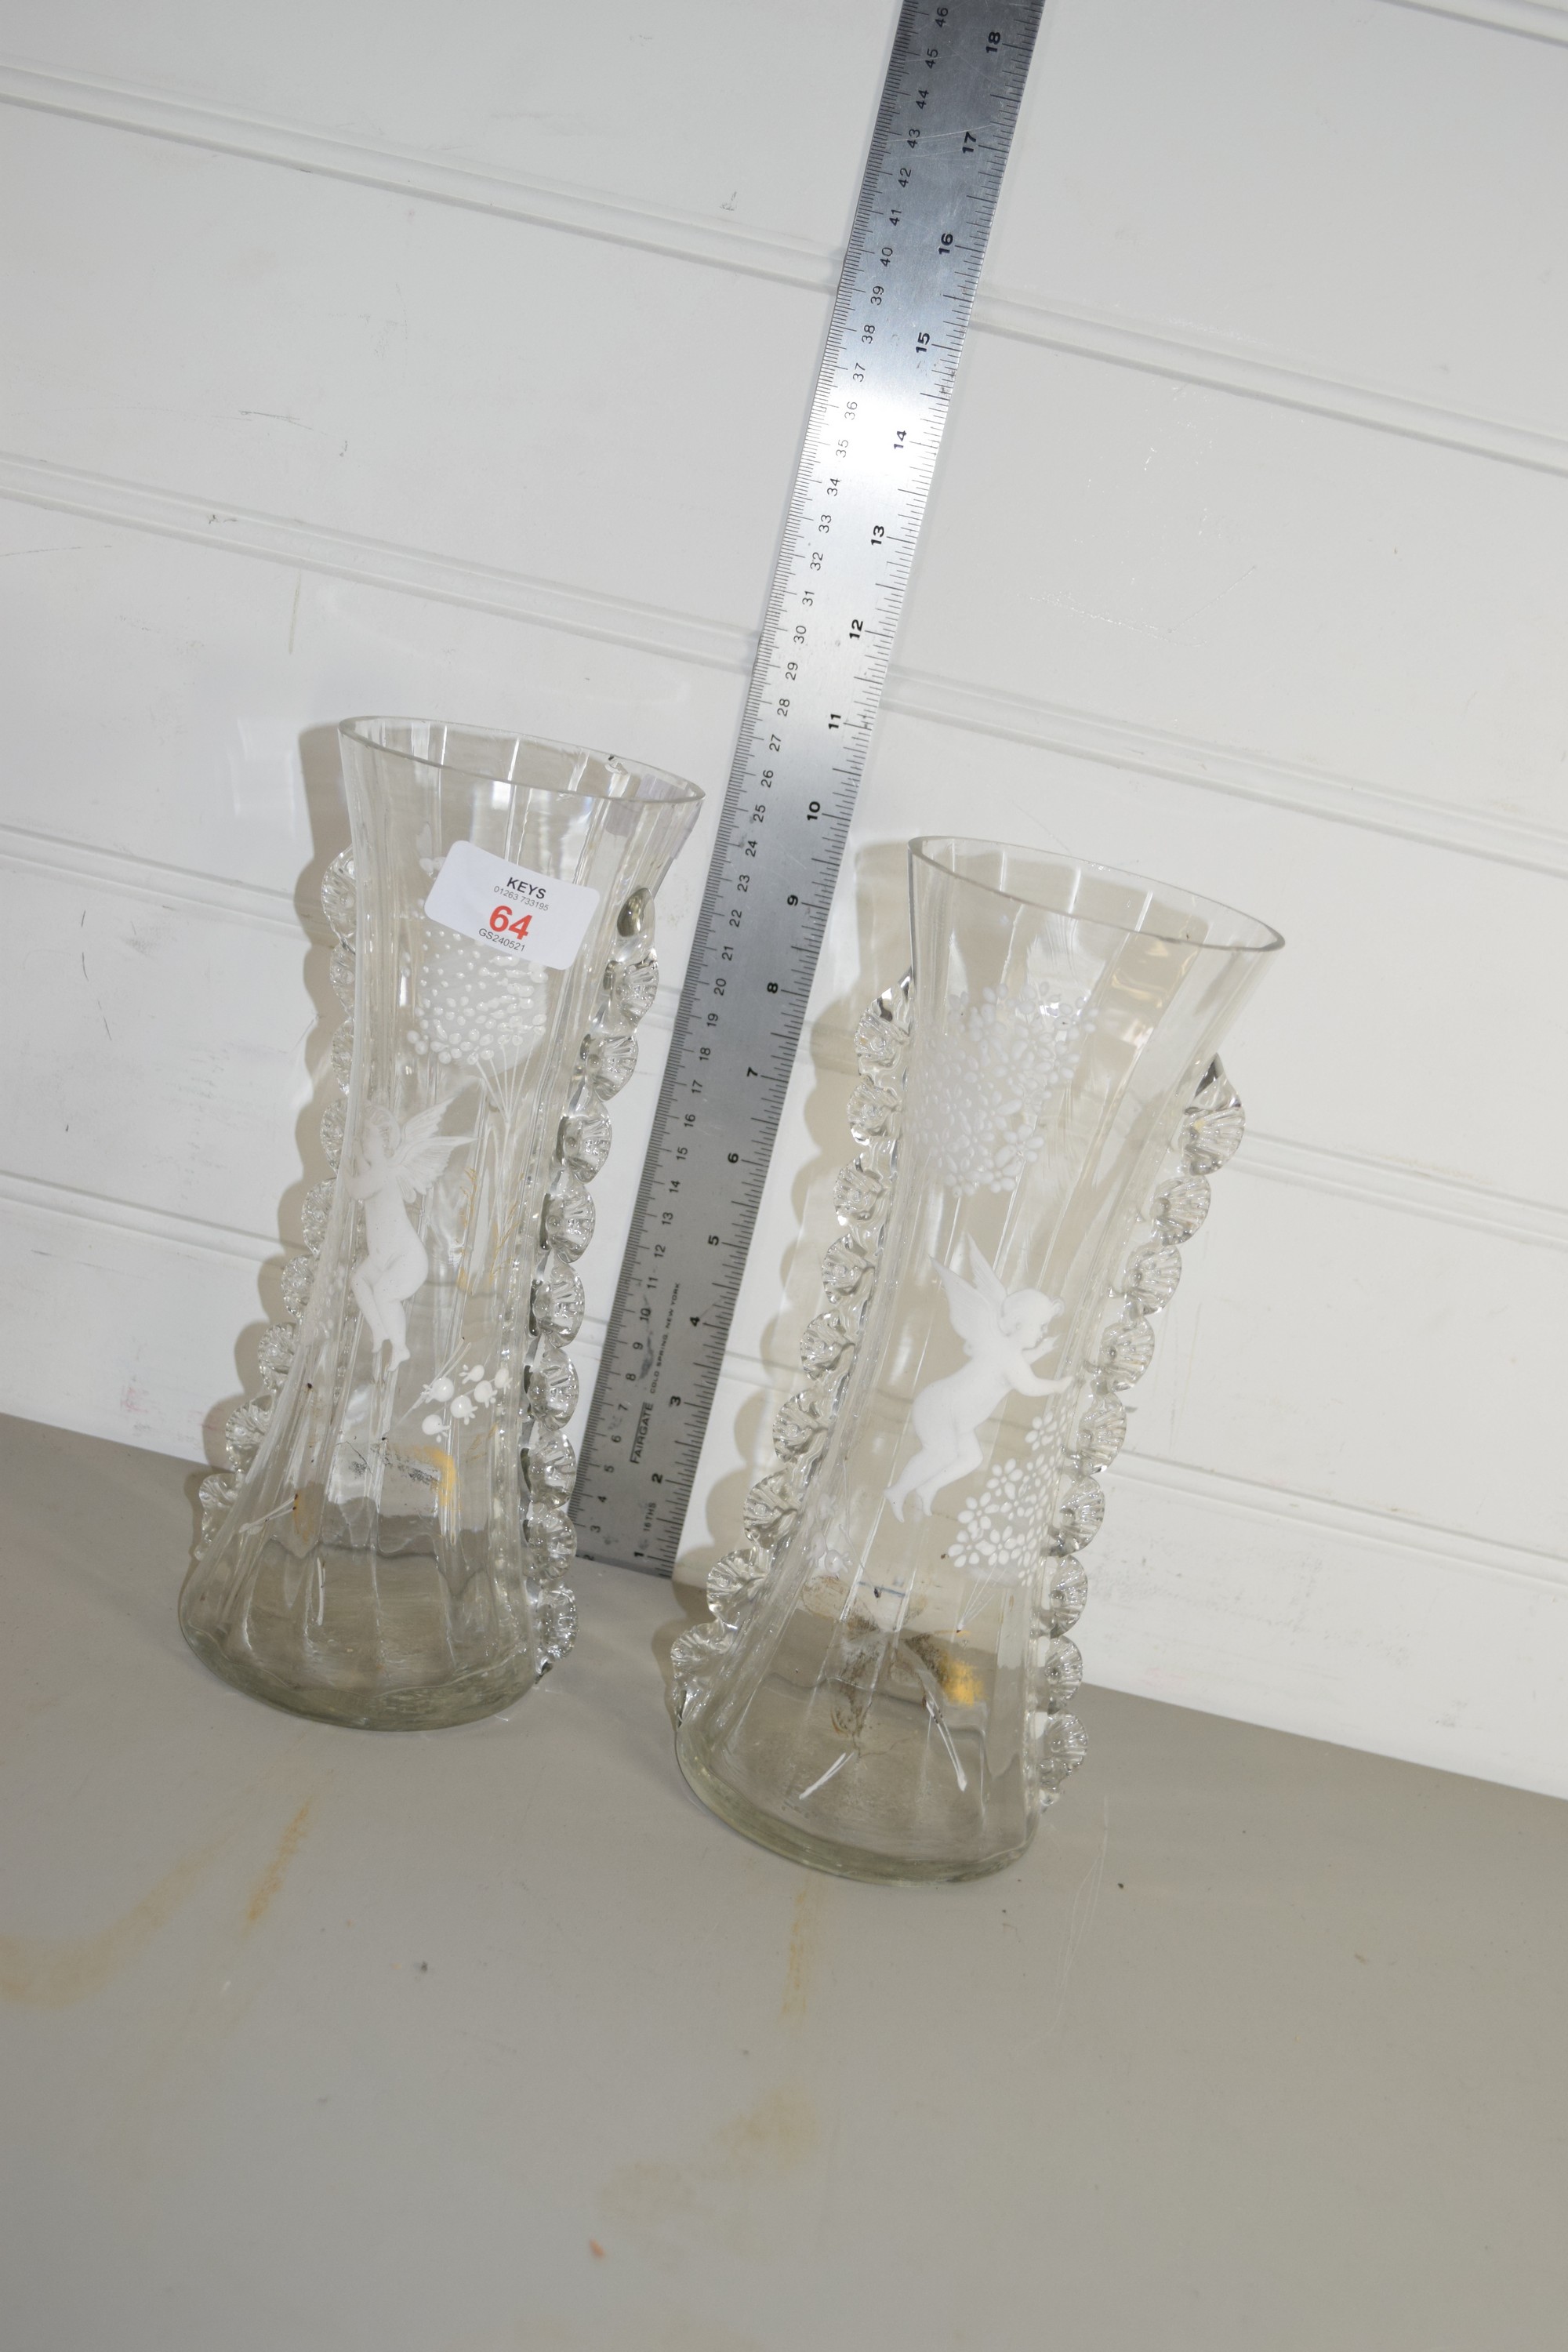 PAIR OF PLAIN GLASS VASES WITH PAINTED MARY GREGORY STYLE DECORATION